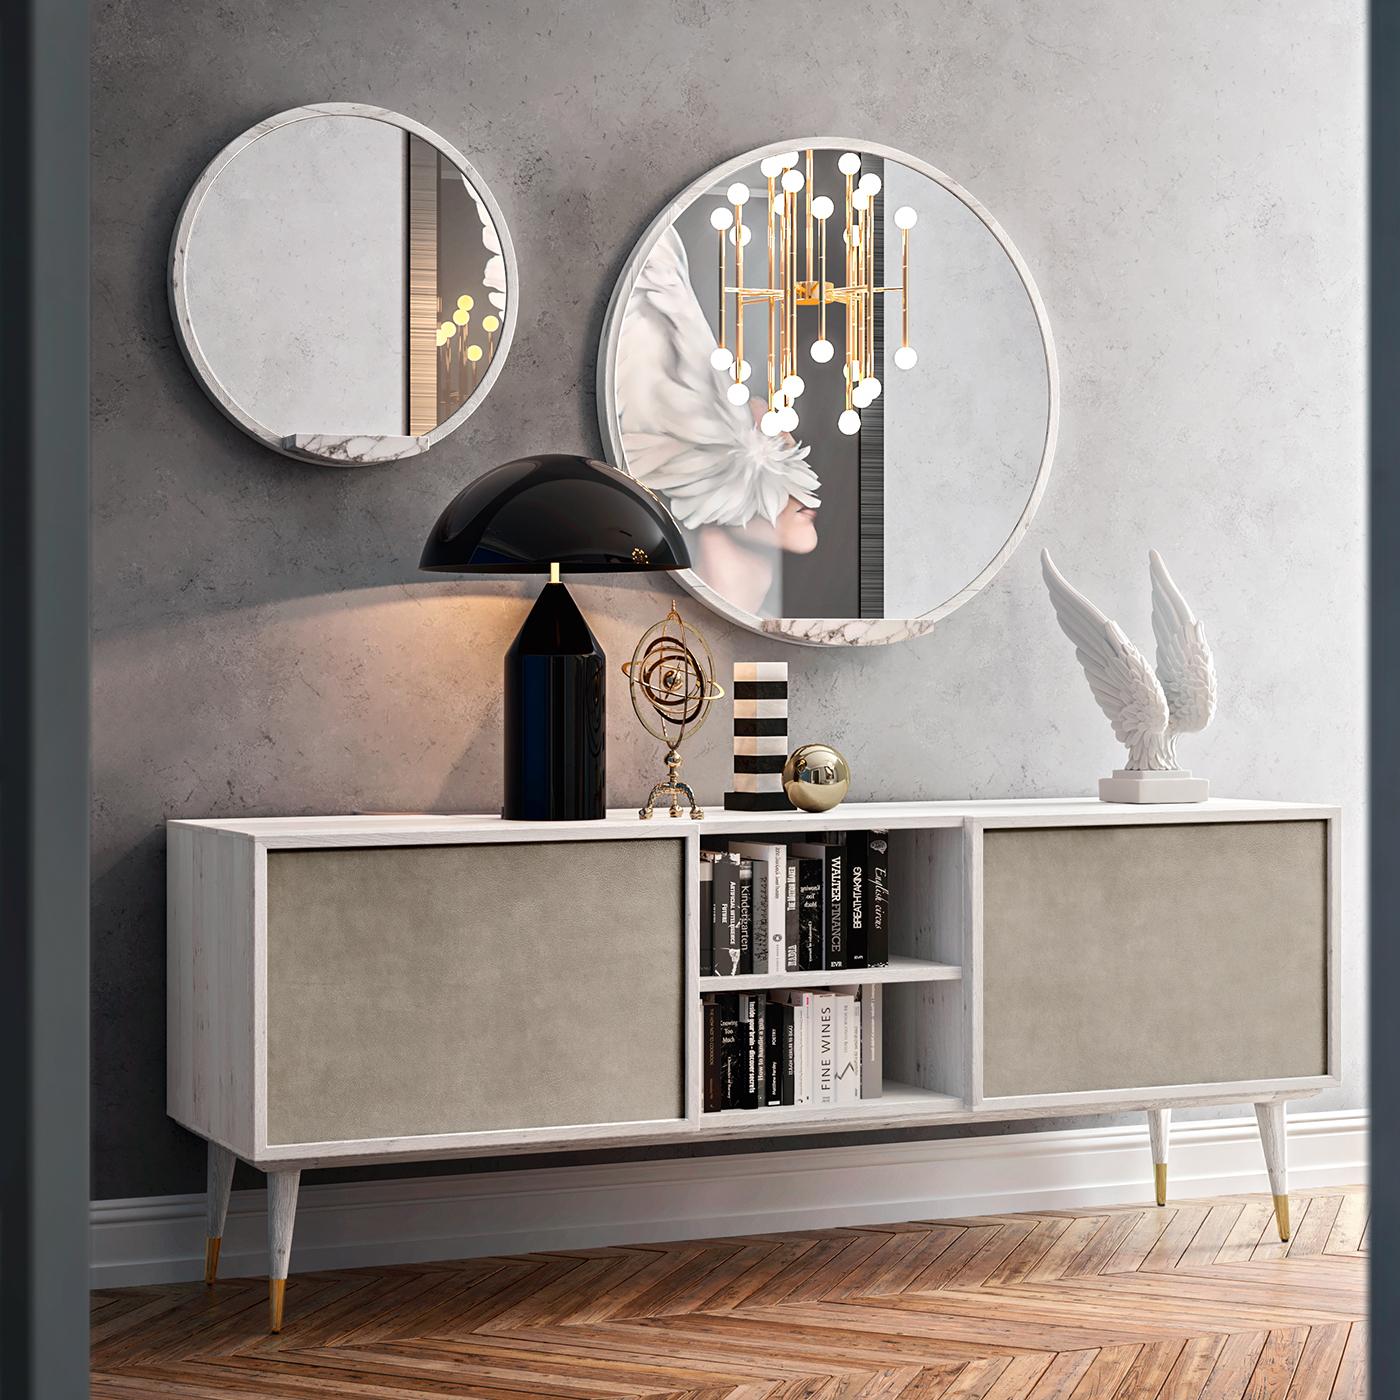 A delicate white finish highlights the charming silhouette of this versatile sideboard in wood with a durmast veneer resting on solid durmast wood legs. The central open compartment is balanced by two lateral storage spaces closed with panels that